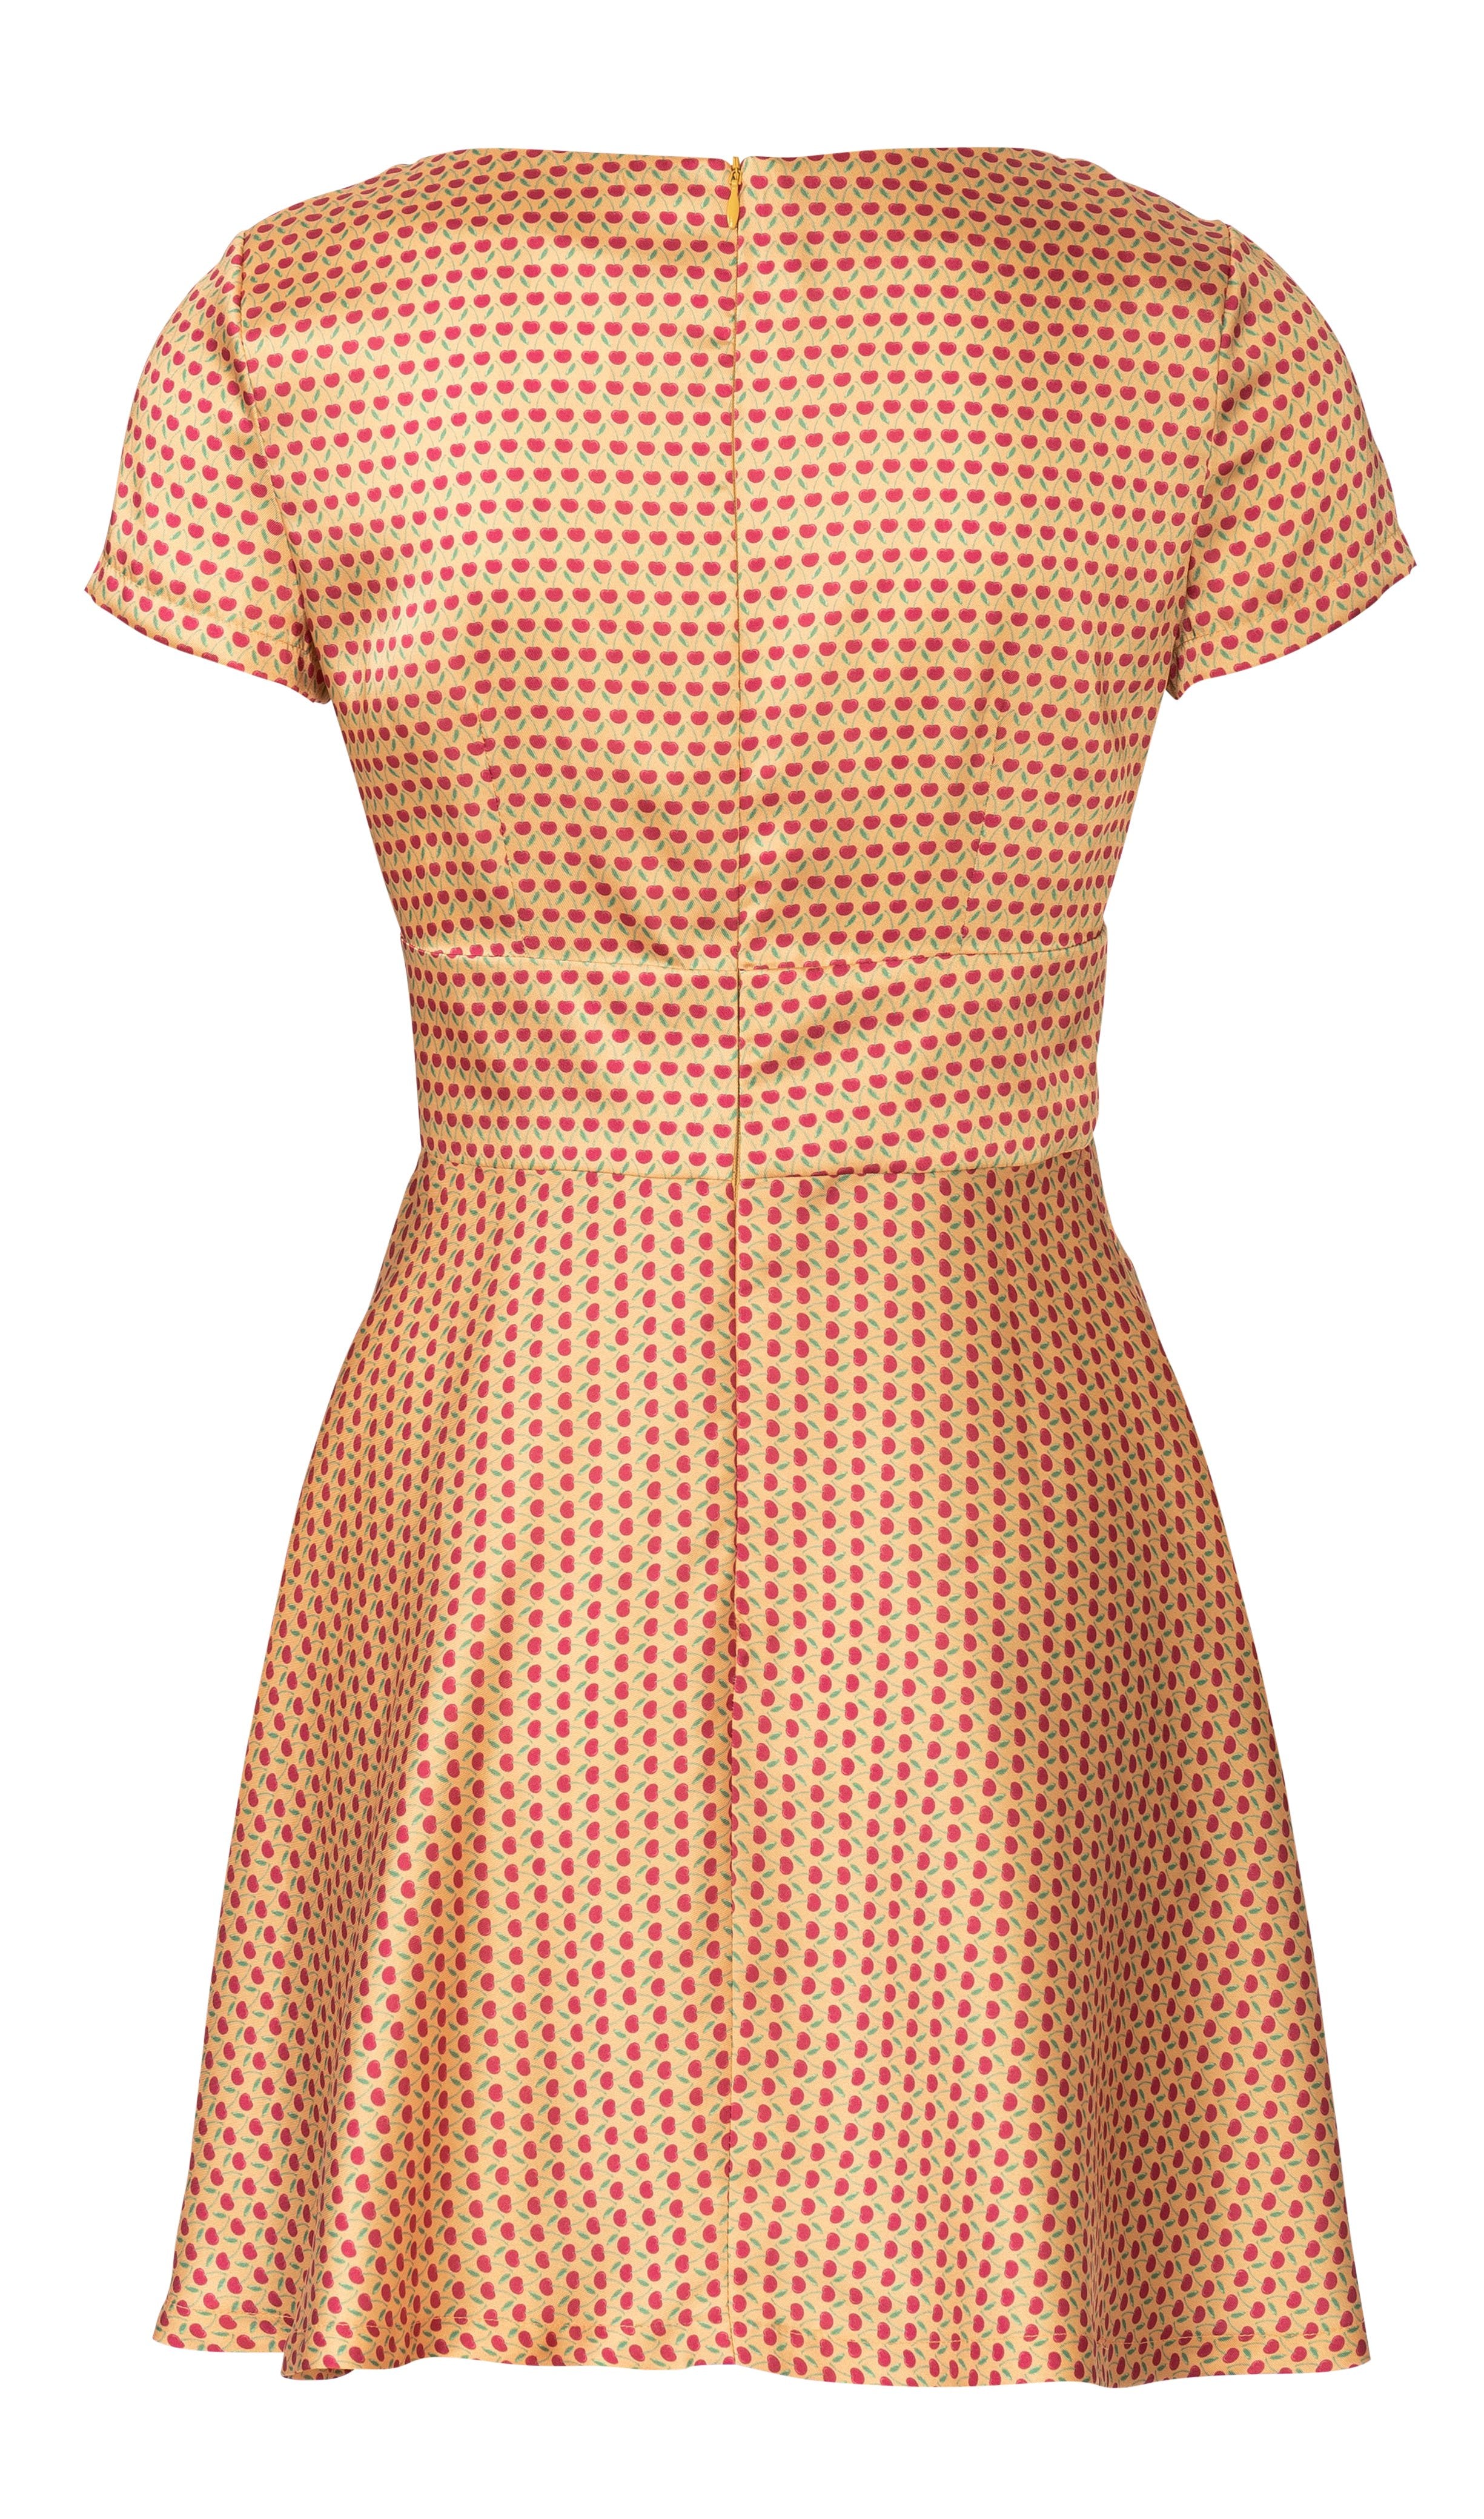 Burda Pattern 6205  Dress with Empire Waist – Bell-shaped Skirt from Jaycotts Sewing Supplies